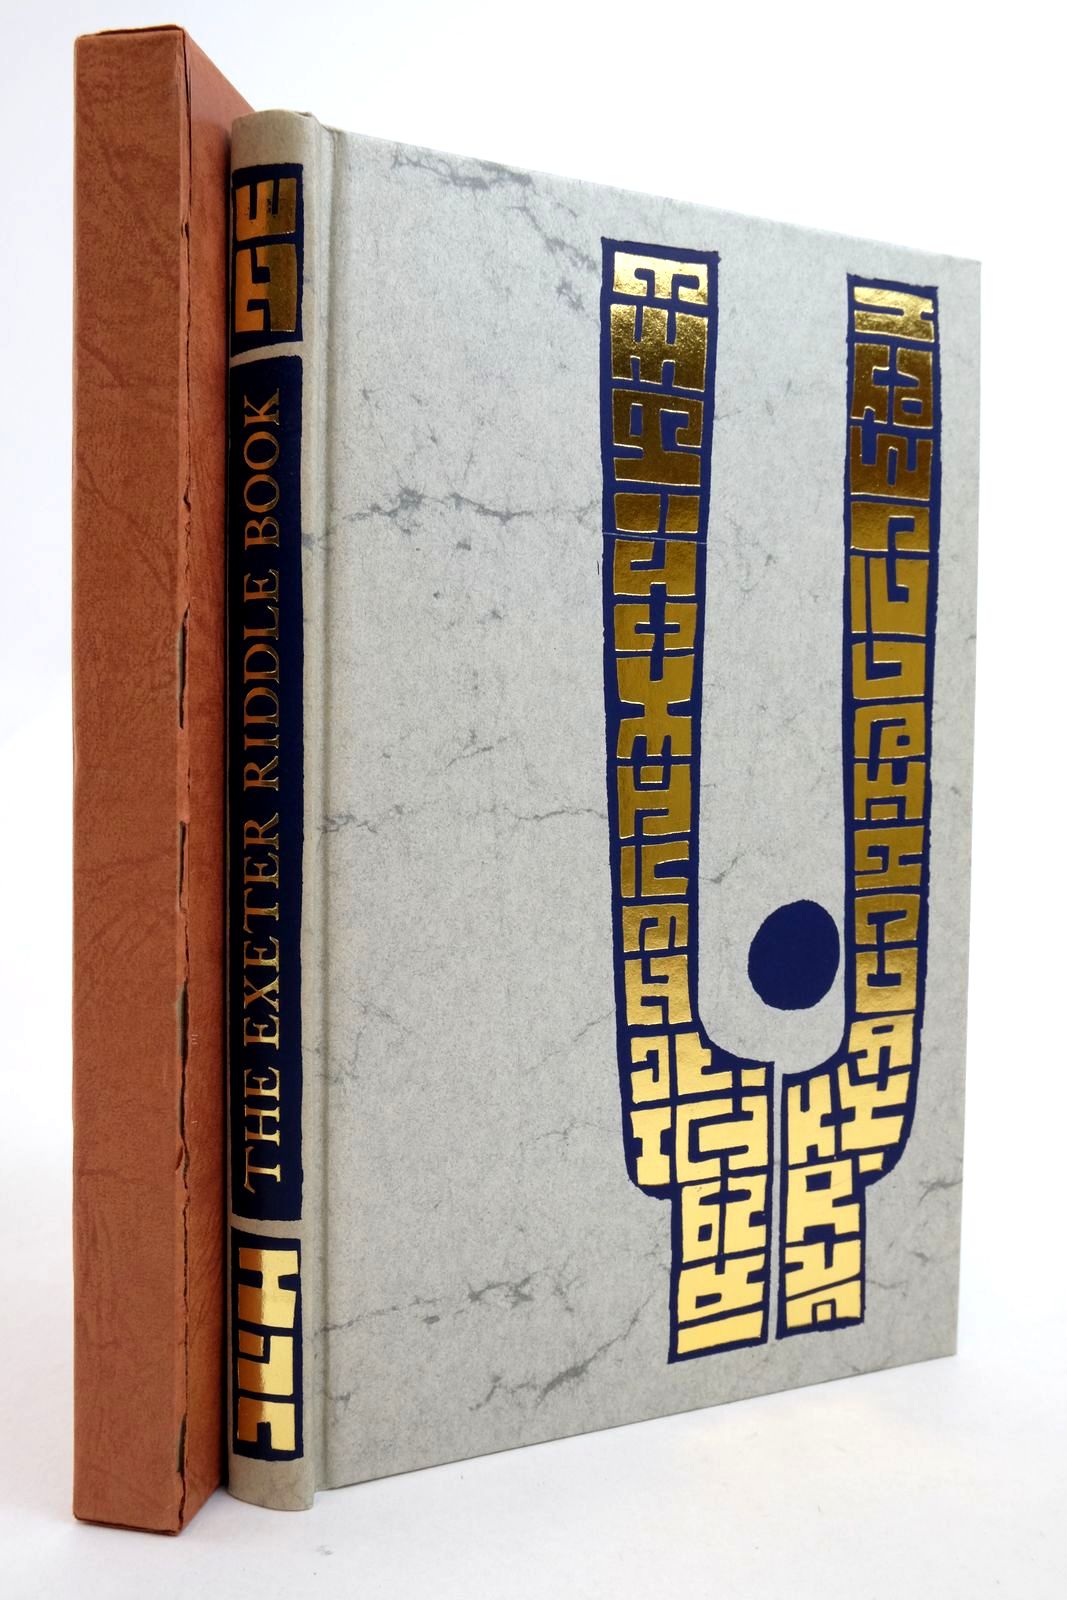 Photo of THE EXETER RIDDLE BOOK written by Crossley-Holland, Kevin illustrated by Burnett, Virgil published by Folio Society (STOCK CODE: 2138350)  for sale by Stella & Rose's Books